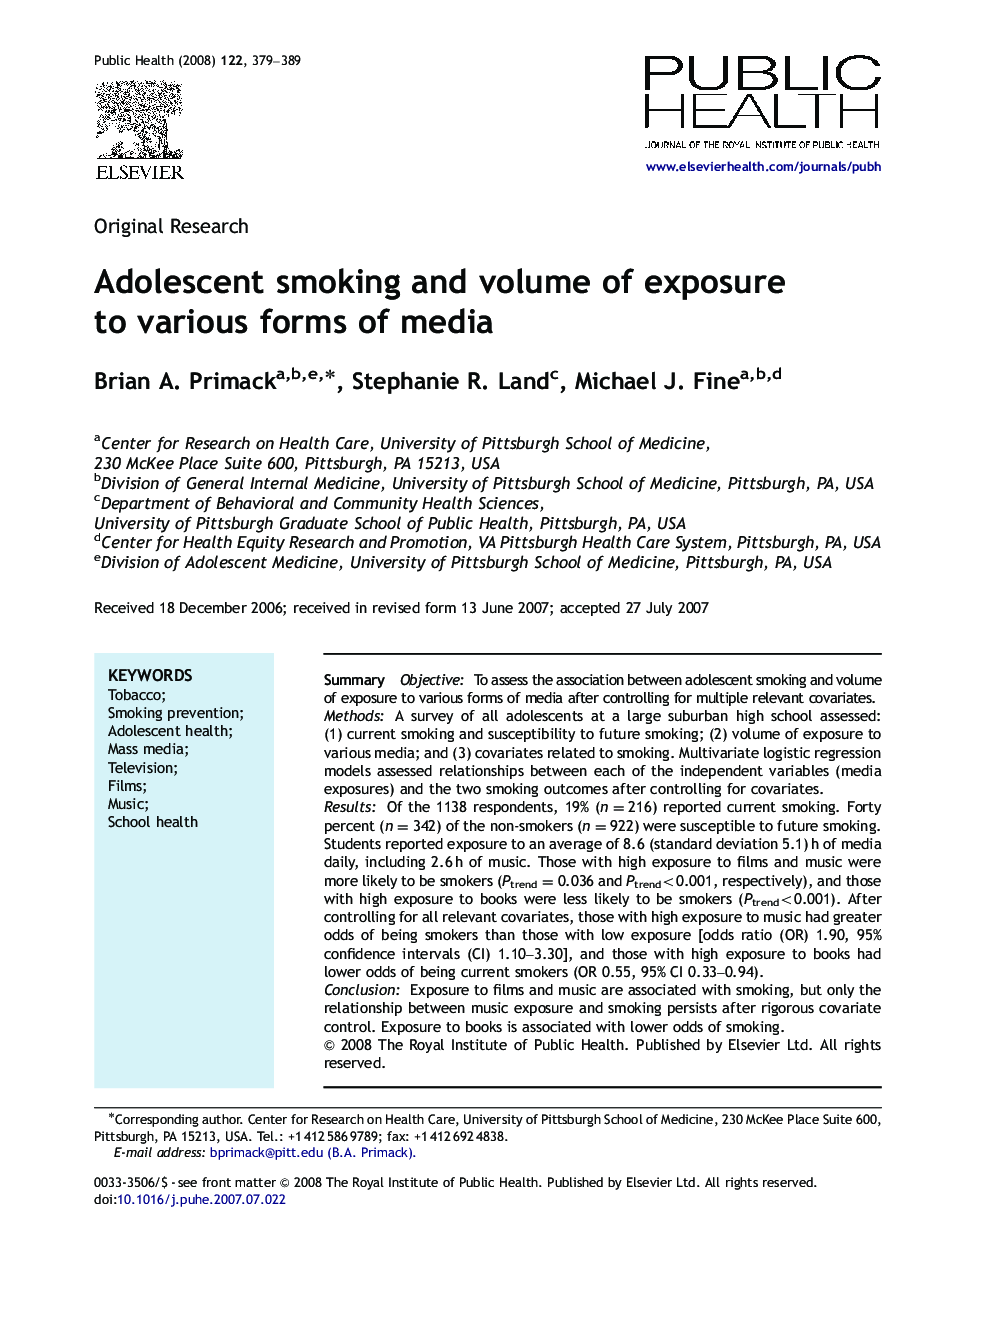 Adolescent smoking and volume of exposure to various forms of media